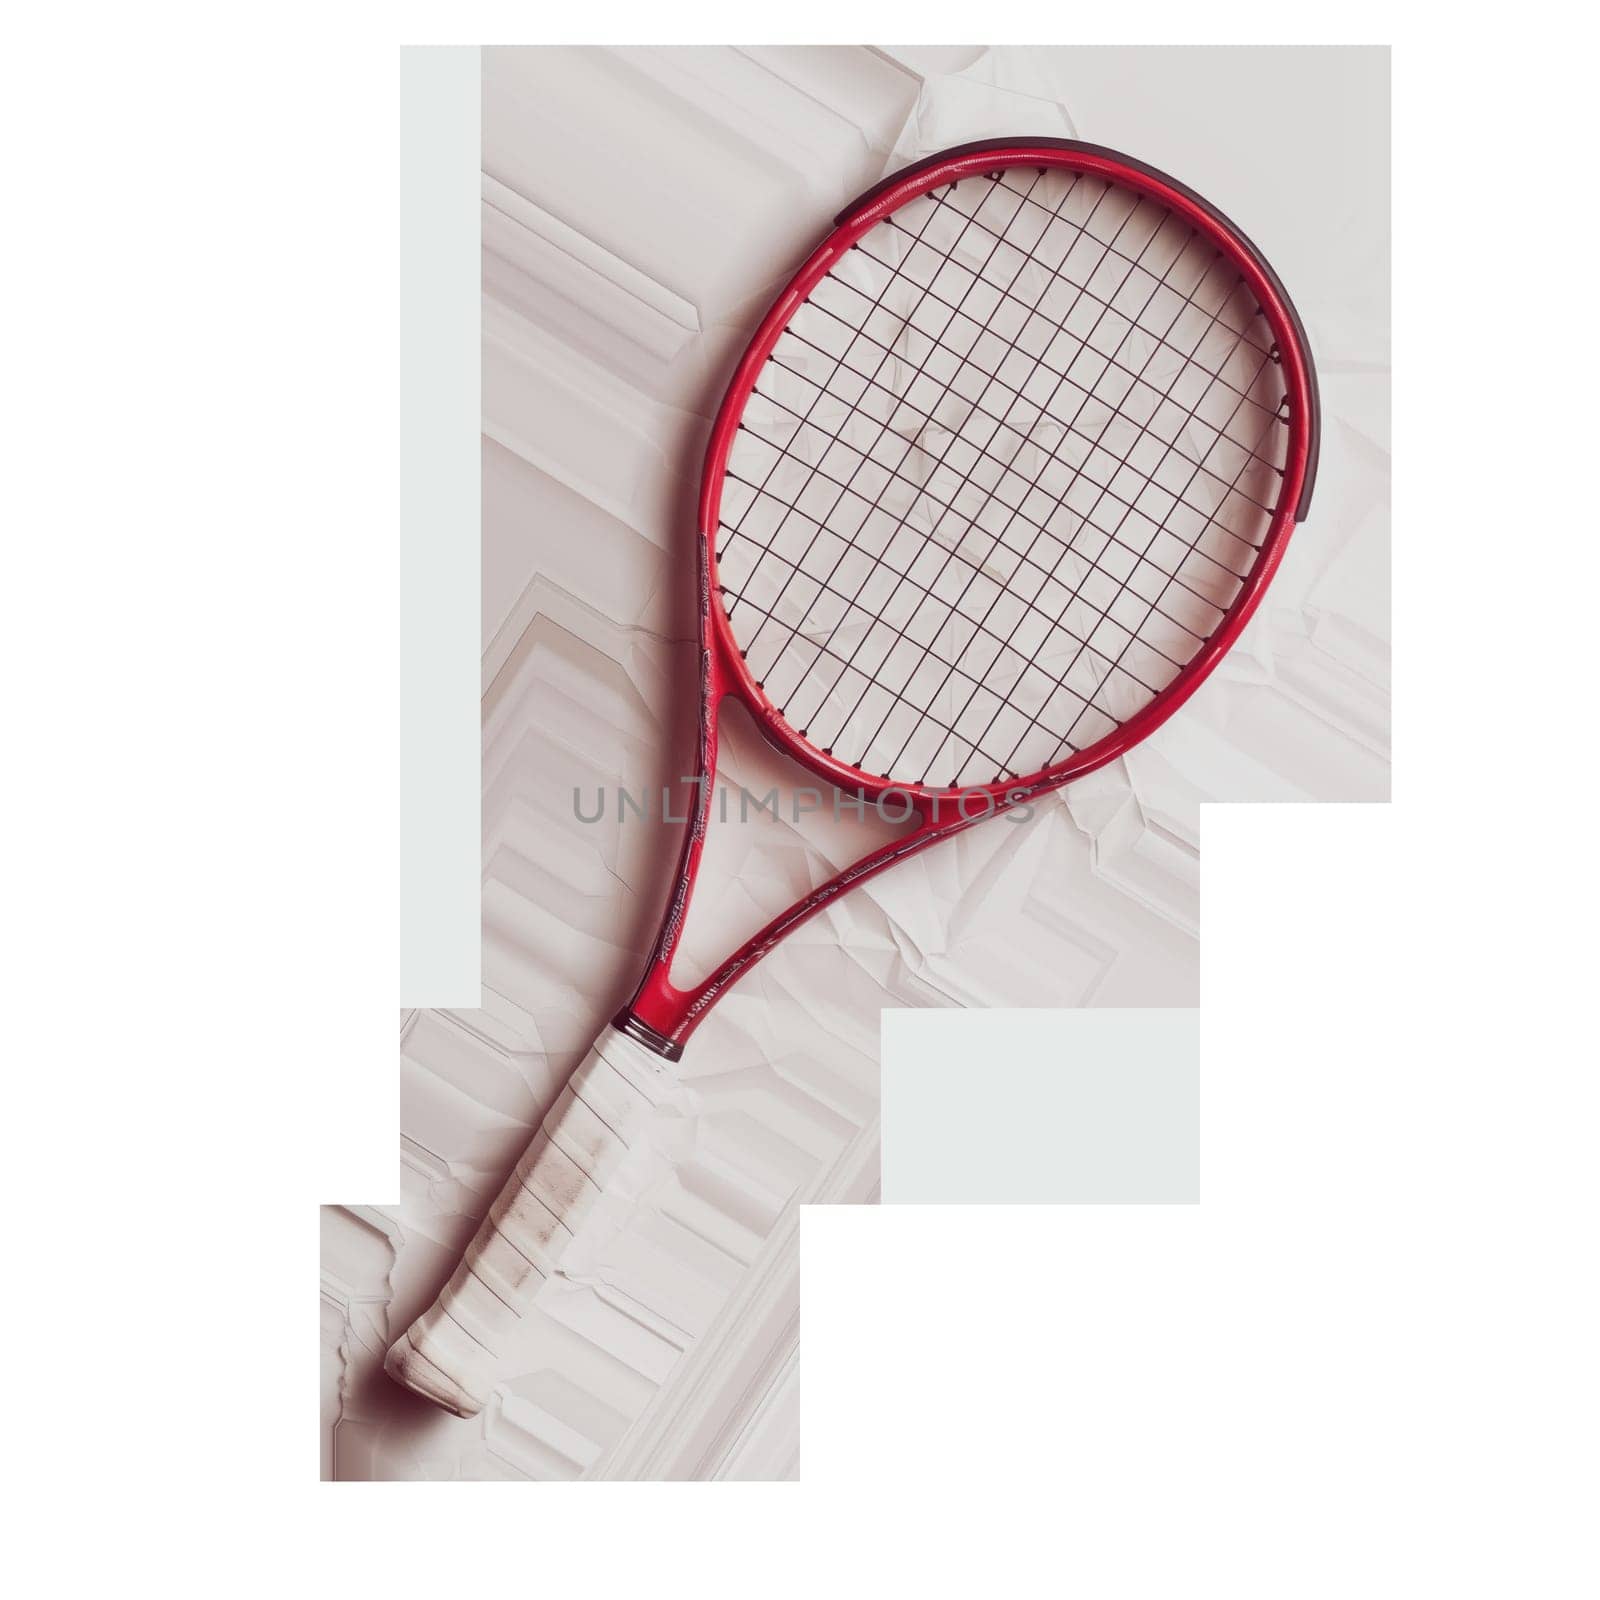 Tennis racket cut out image by Dustick